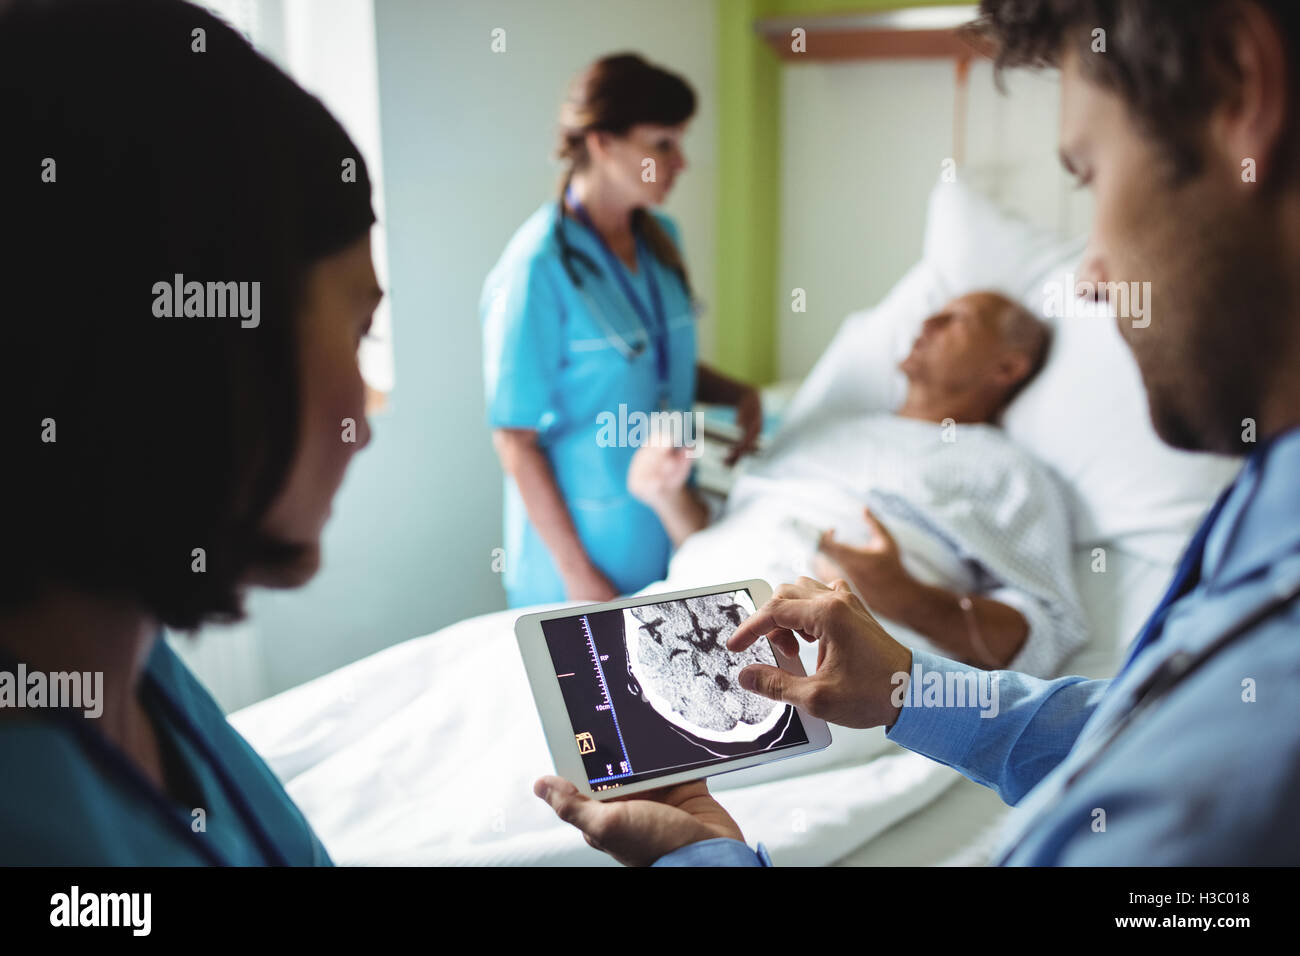 Male doctor and nurse using digital tablet Stock Photo